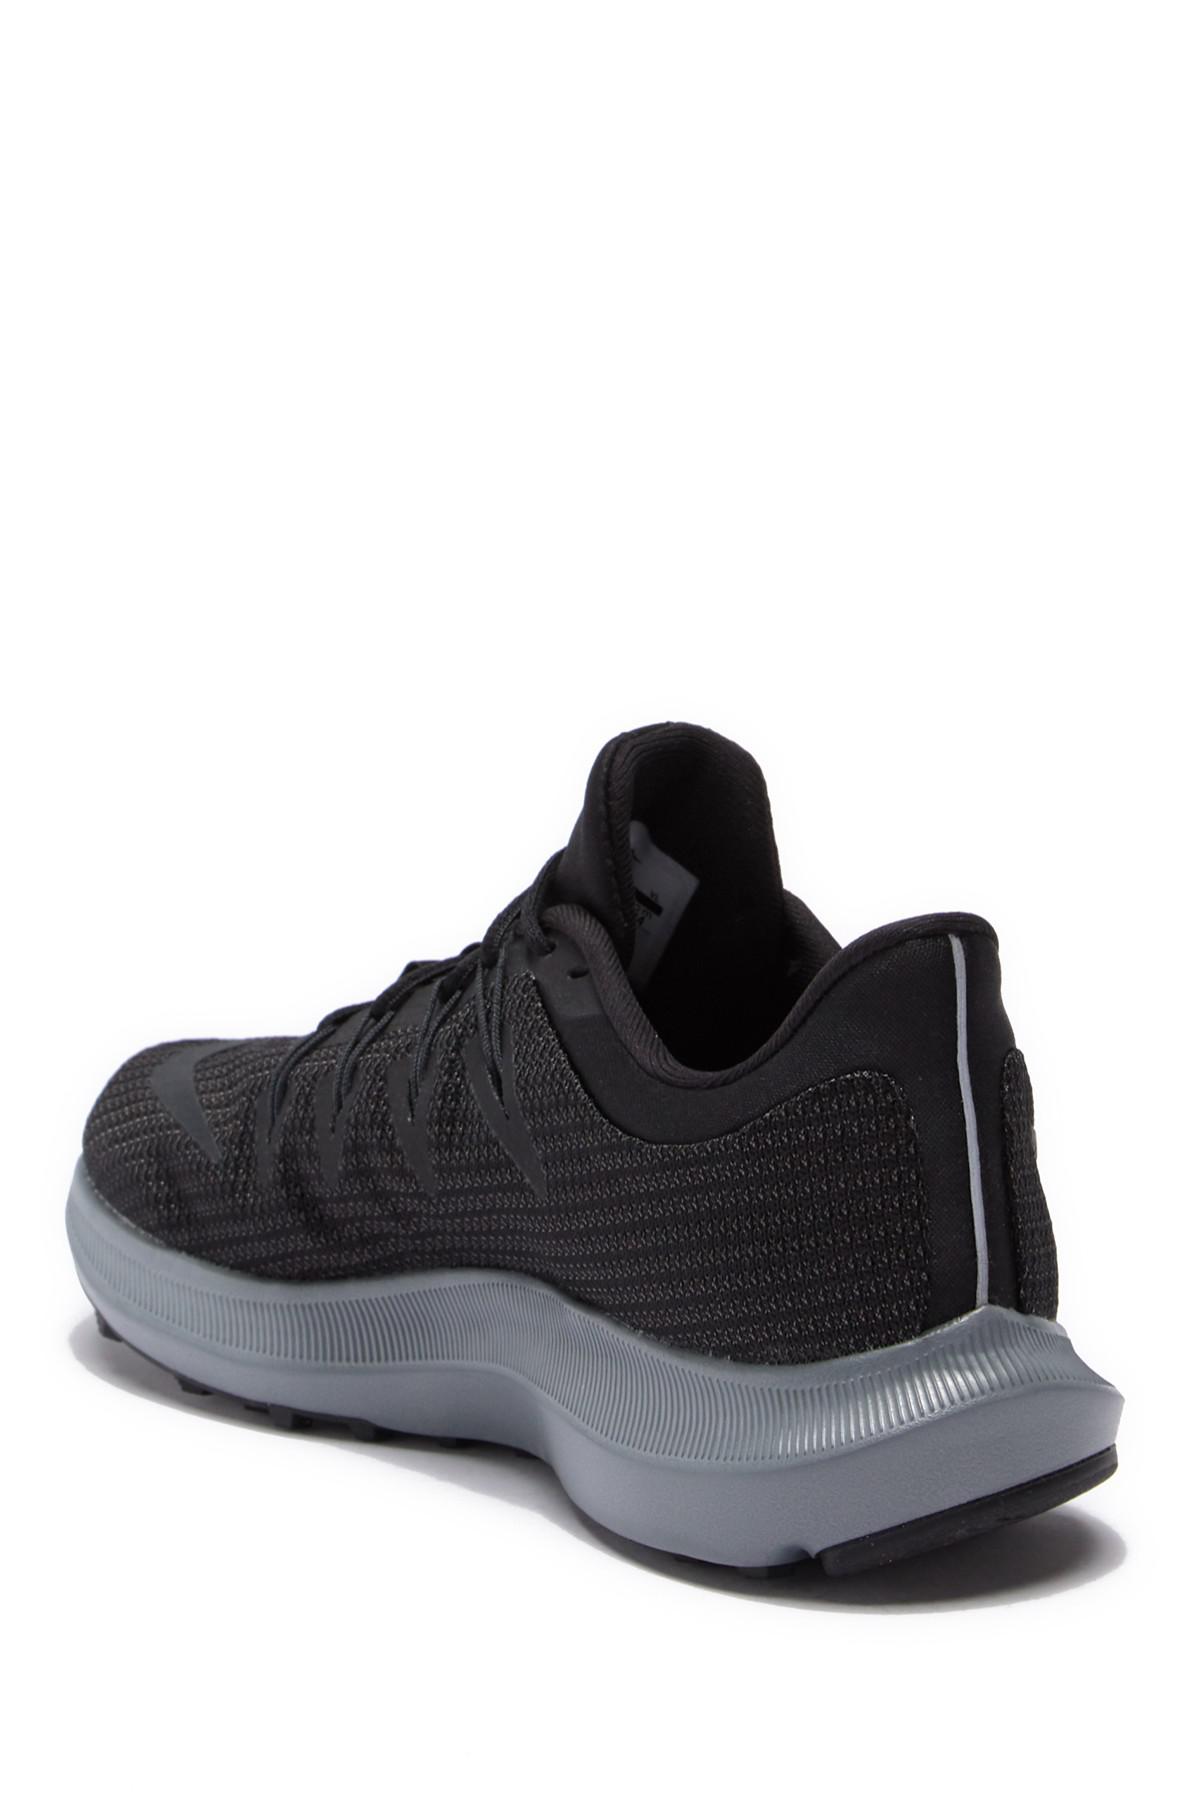 Nike Quest Wide Running Sneaker - Wide Width Available in Black - Lyst